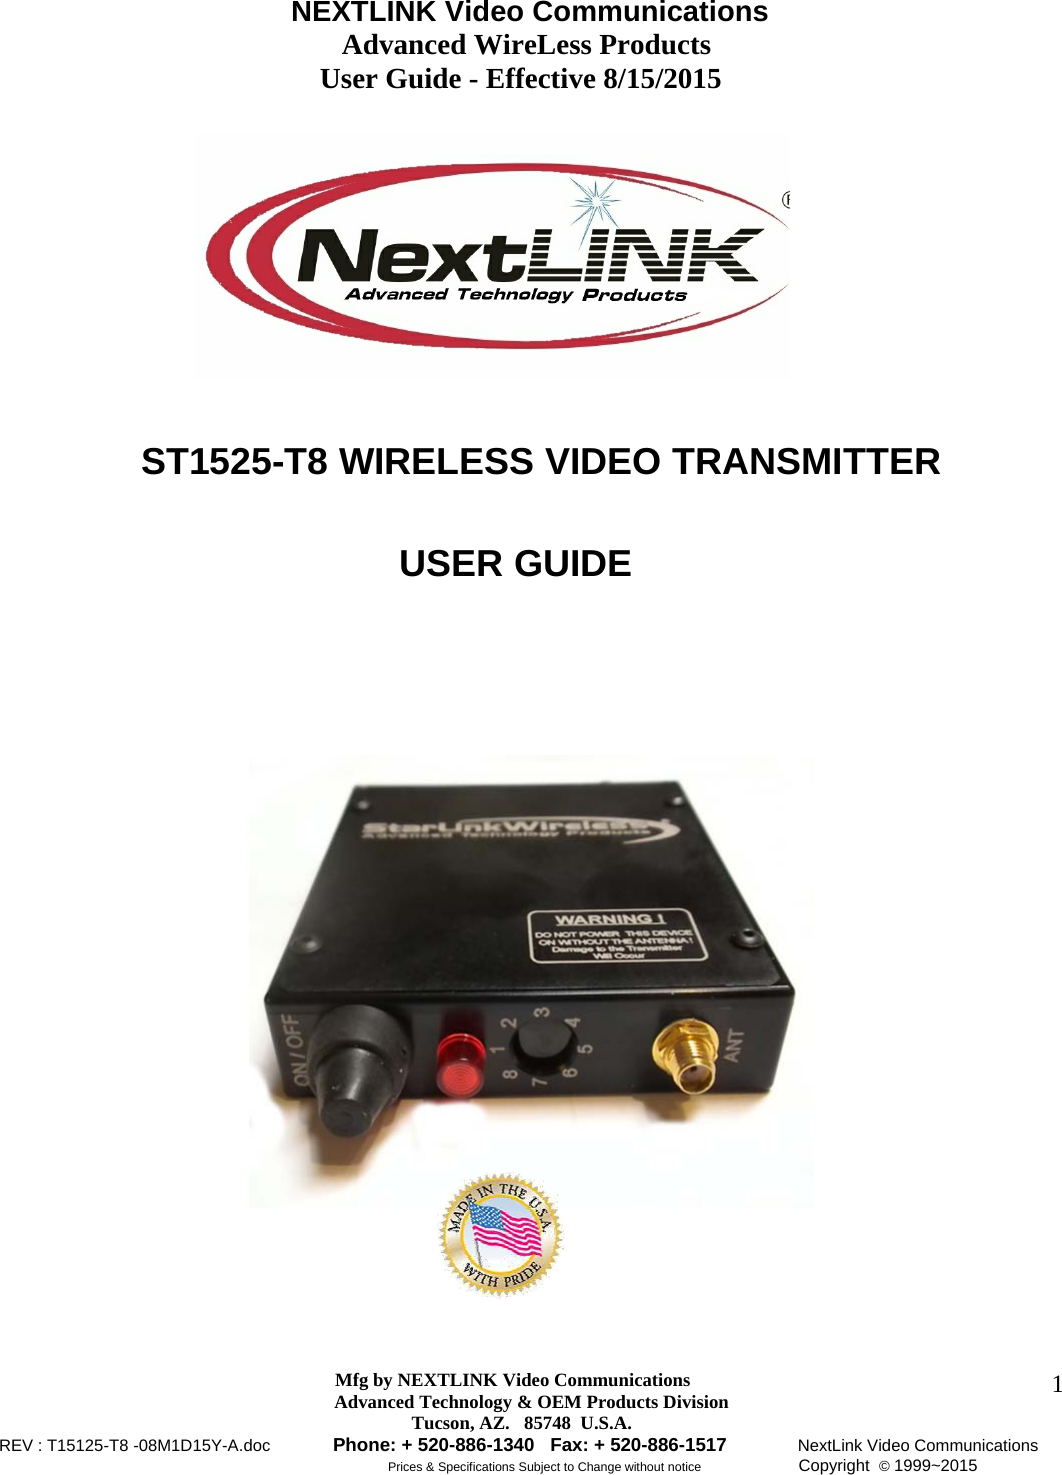                                     NEXTLINK Video Communications                                                 Advanced WireLess Products                                               User Guide - Effective 8/15/2015  Mfg by NEXTLINK Video Communications Advanced Technology &amp; OEM Products Division         Tucson, AZ.   85748  U.S.A. REV : T15125-T8 -08M1D15Y-A.doc         Phone: + 520-886-1340   Fax: + 520-886-1517          NextLink Video Communications                                                         Prices &amp; Specifications Subject to Change without notice              Copyright  © 1999~2015      1                             ST1525-T8 WIRELESS VIDEO TRANSMITTER   USER GUIDE  